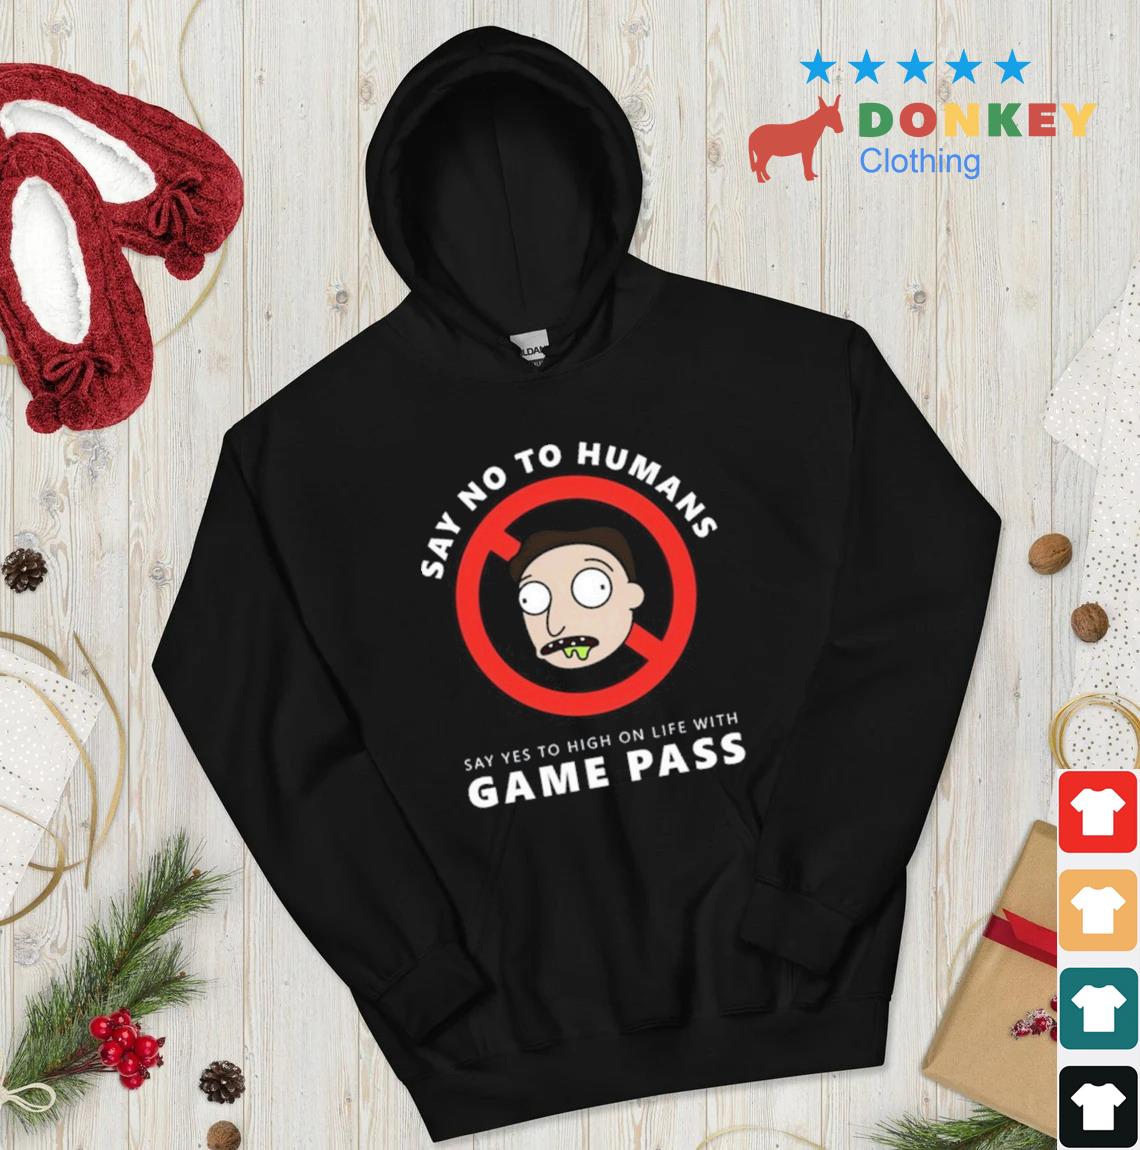 High On Life Say No To Humans Say Yes To High On Life With Game Pass Shirt hoodie don den